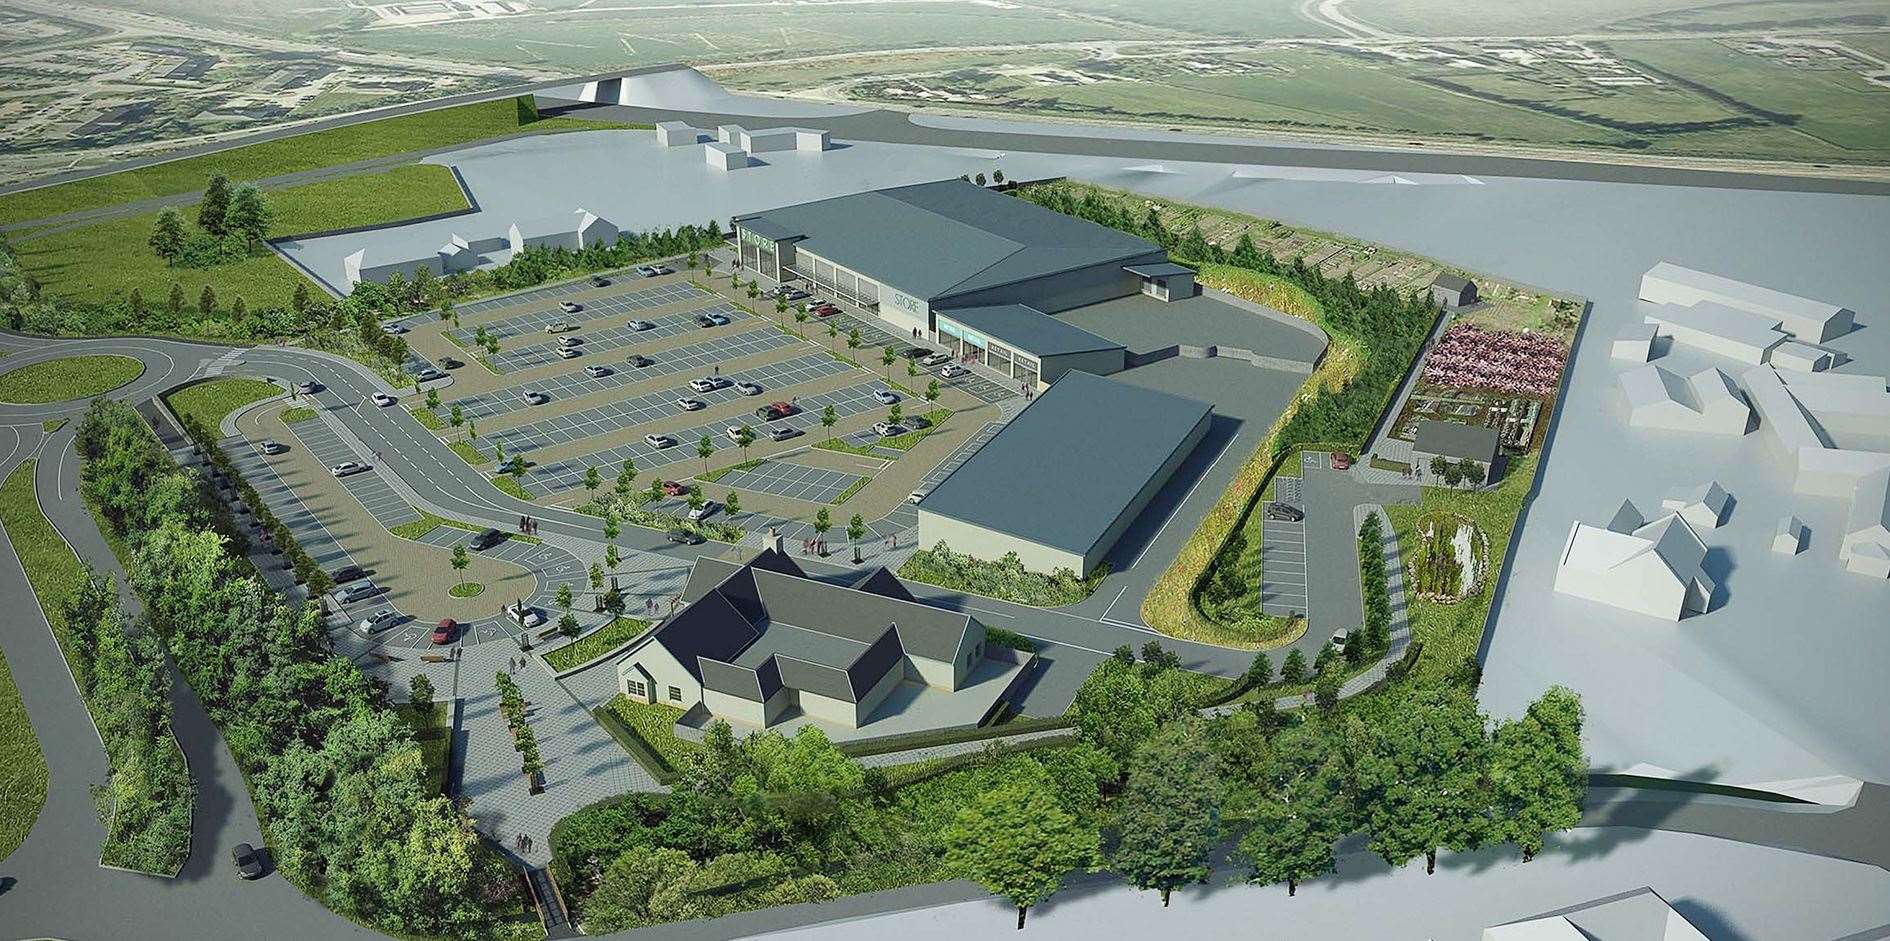 Expansion plans at Inshes Retail Park include shops, a public house and restaurant, community allotments plus car parking and new access roads.